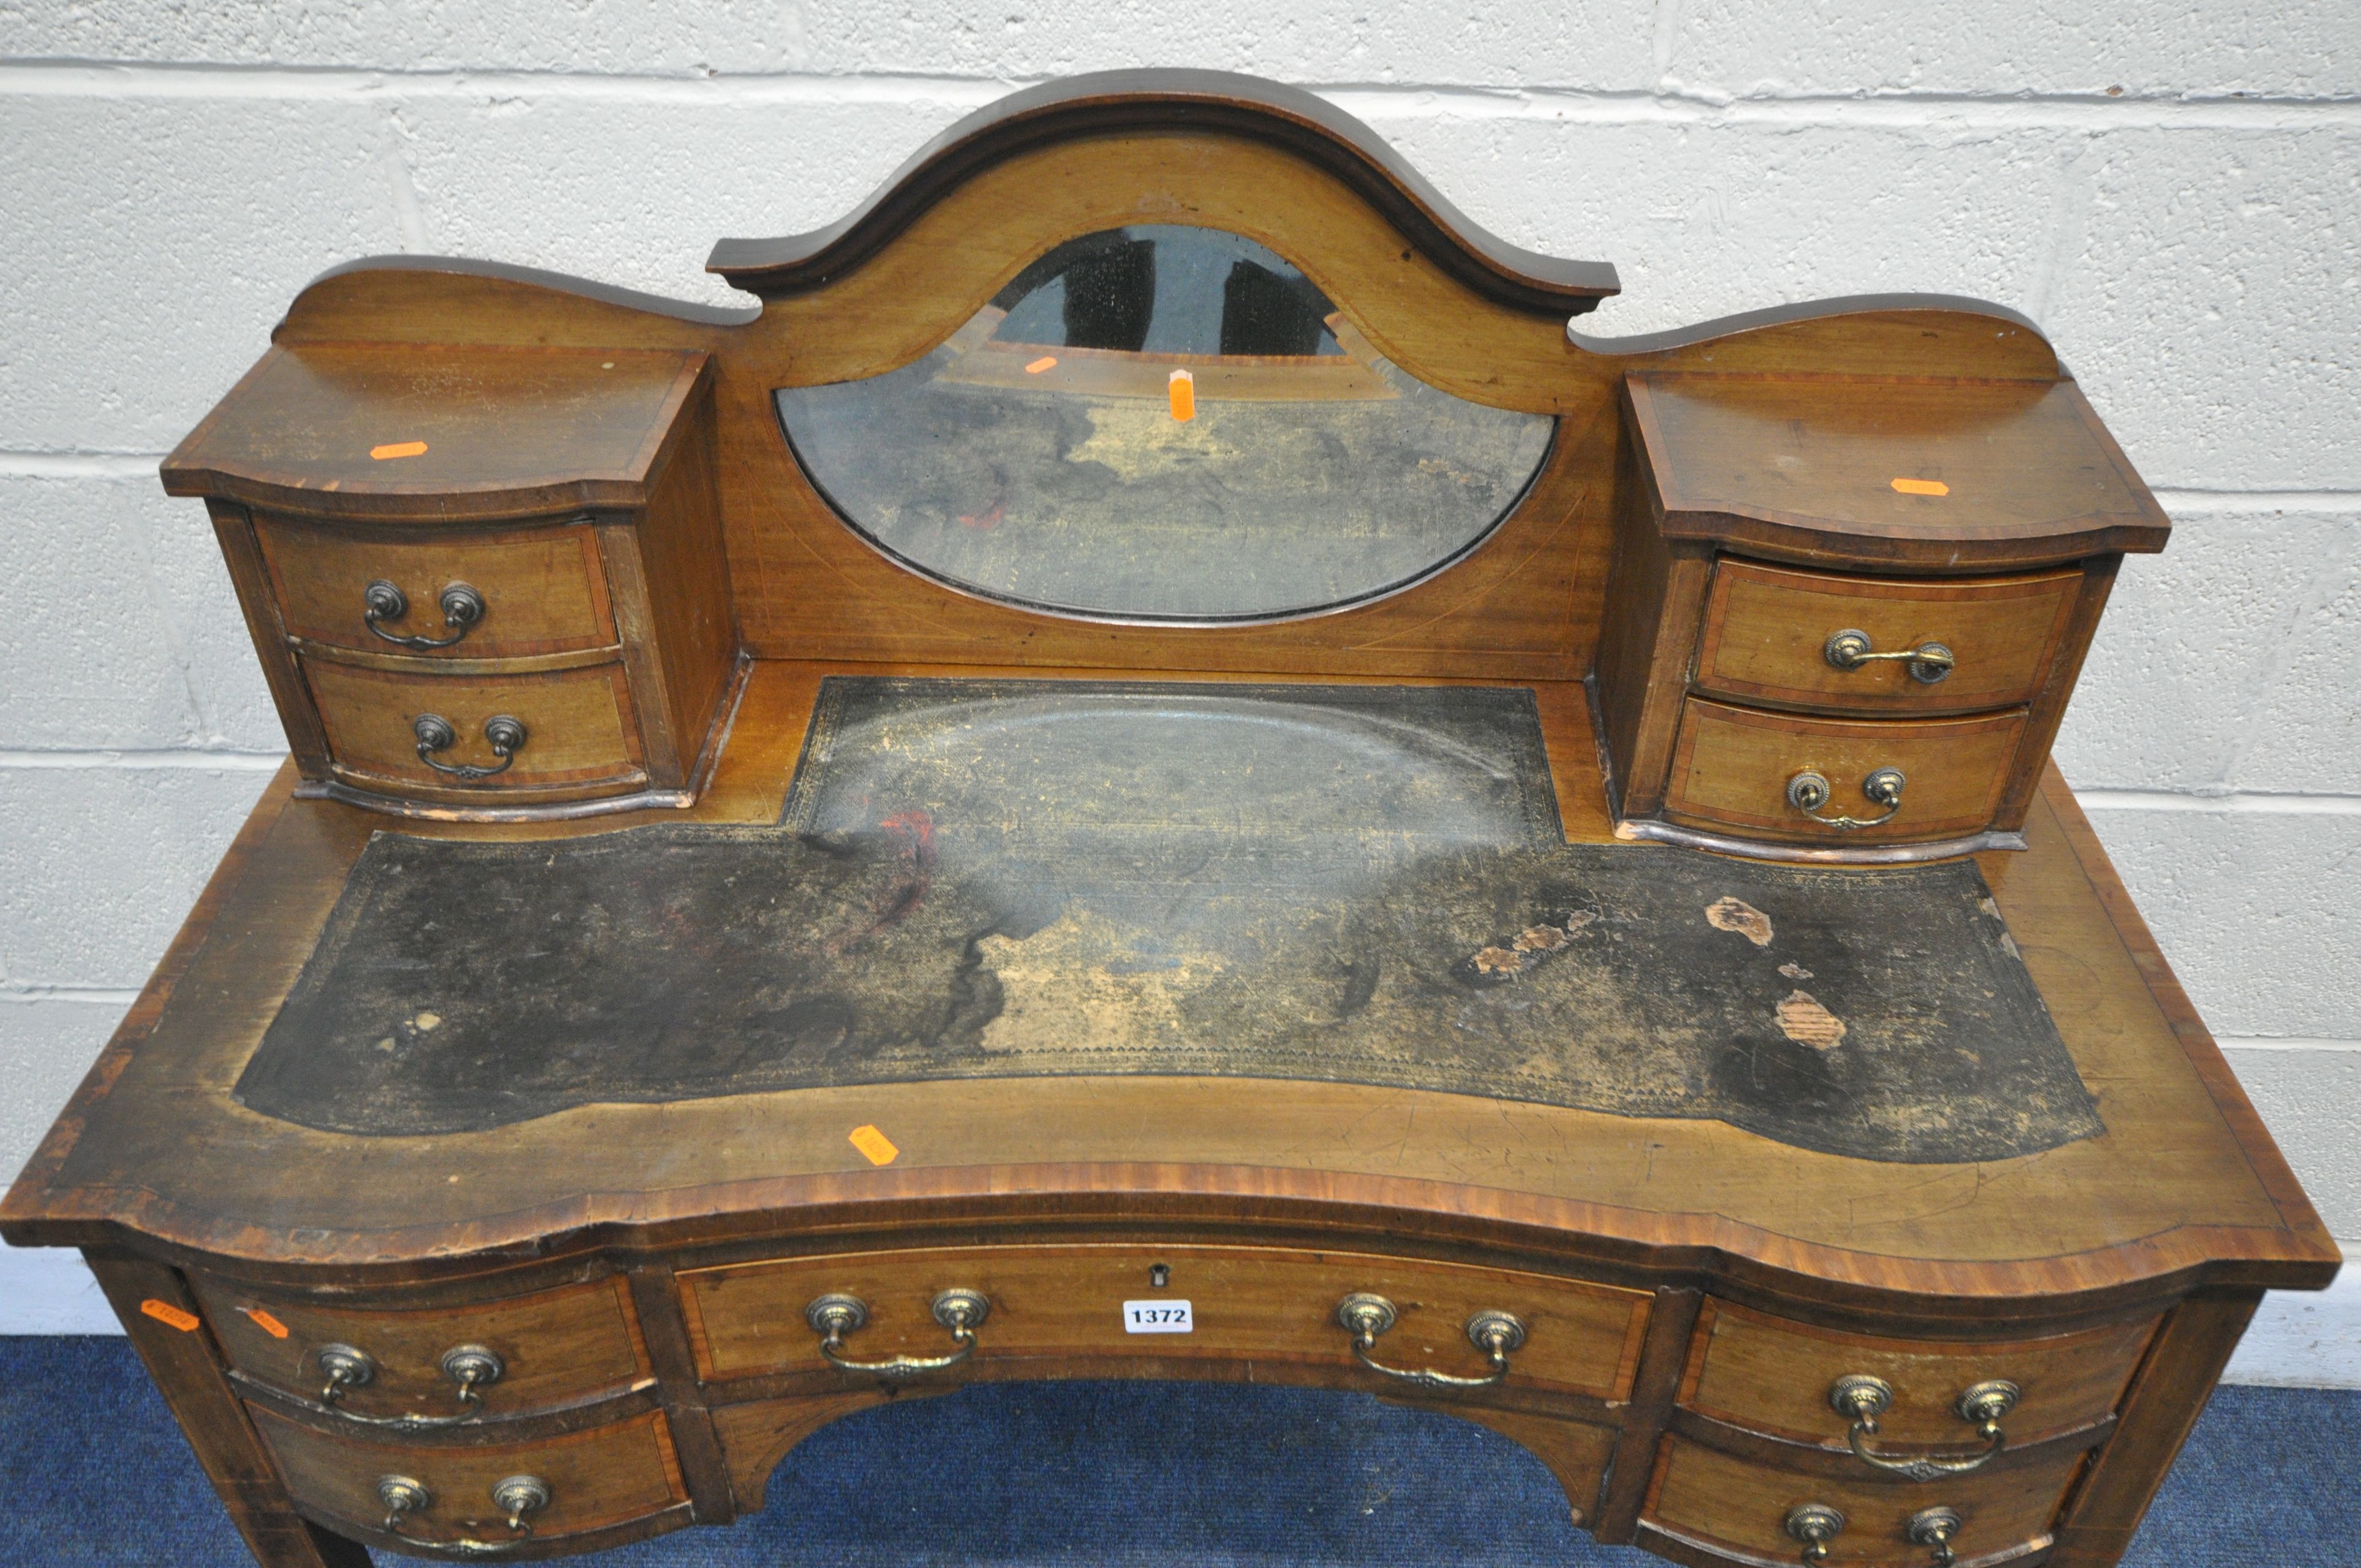 A LATE 19TH/ EARLY 20TH CENTURY MAHOGANY AND CROSSBANDED LADIES DESK, with an arrangement of drawers - Image 2 of 4